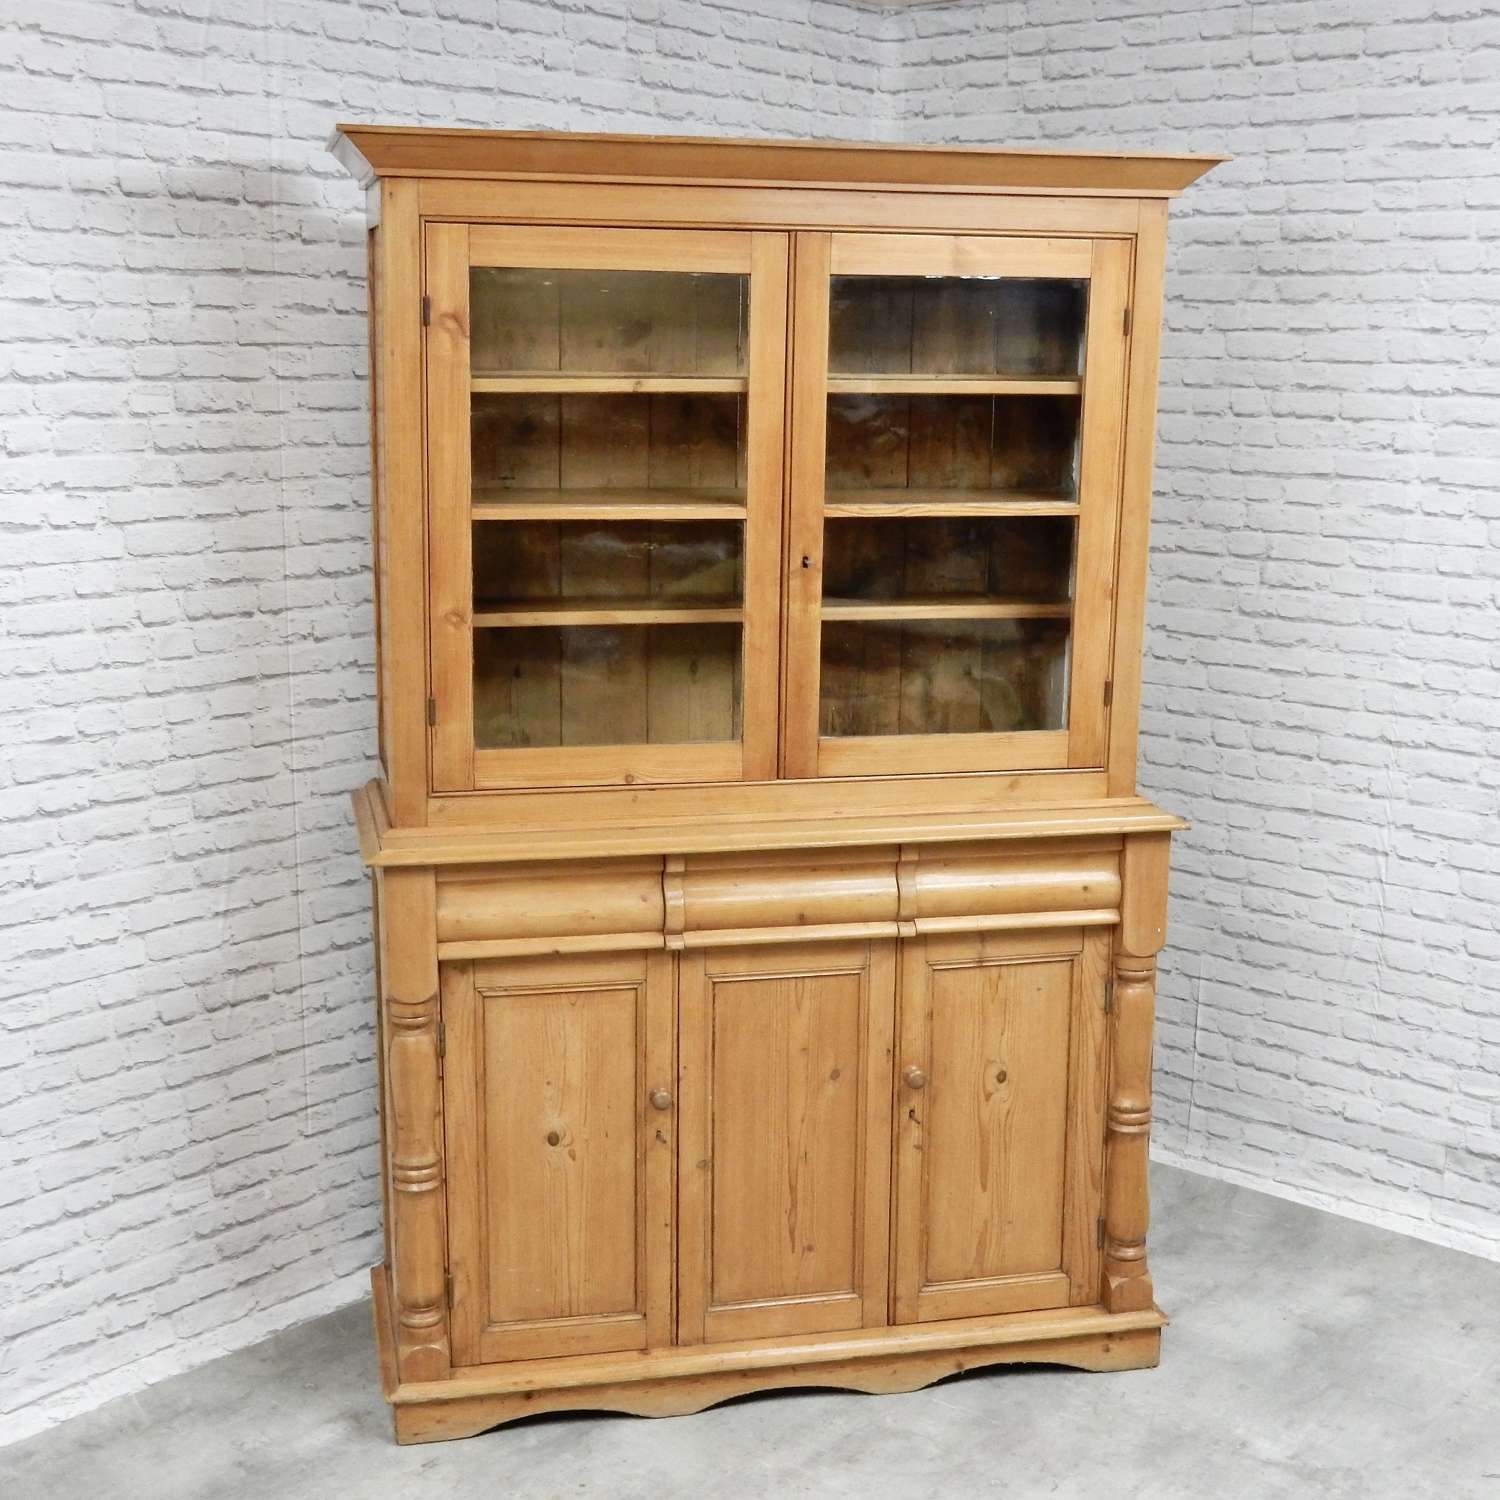 West Country Pine Dresser